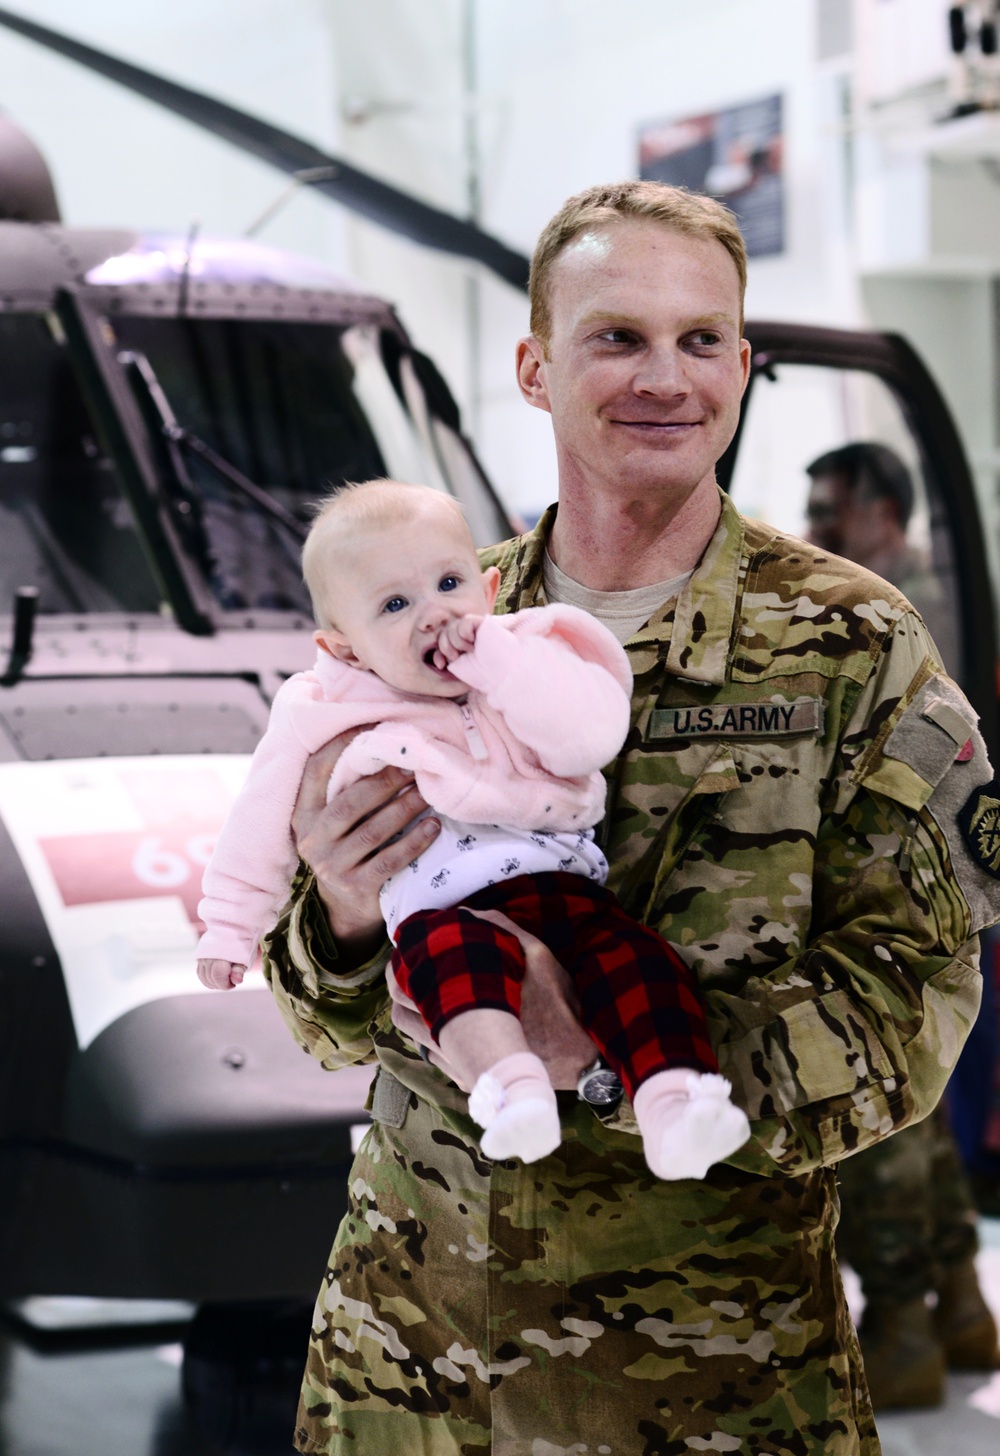 Oregon Army National Guard welcomes home air ambulance unit from Middle East deployment